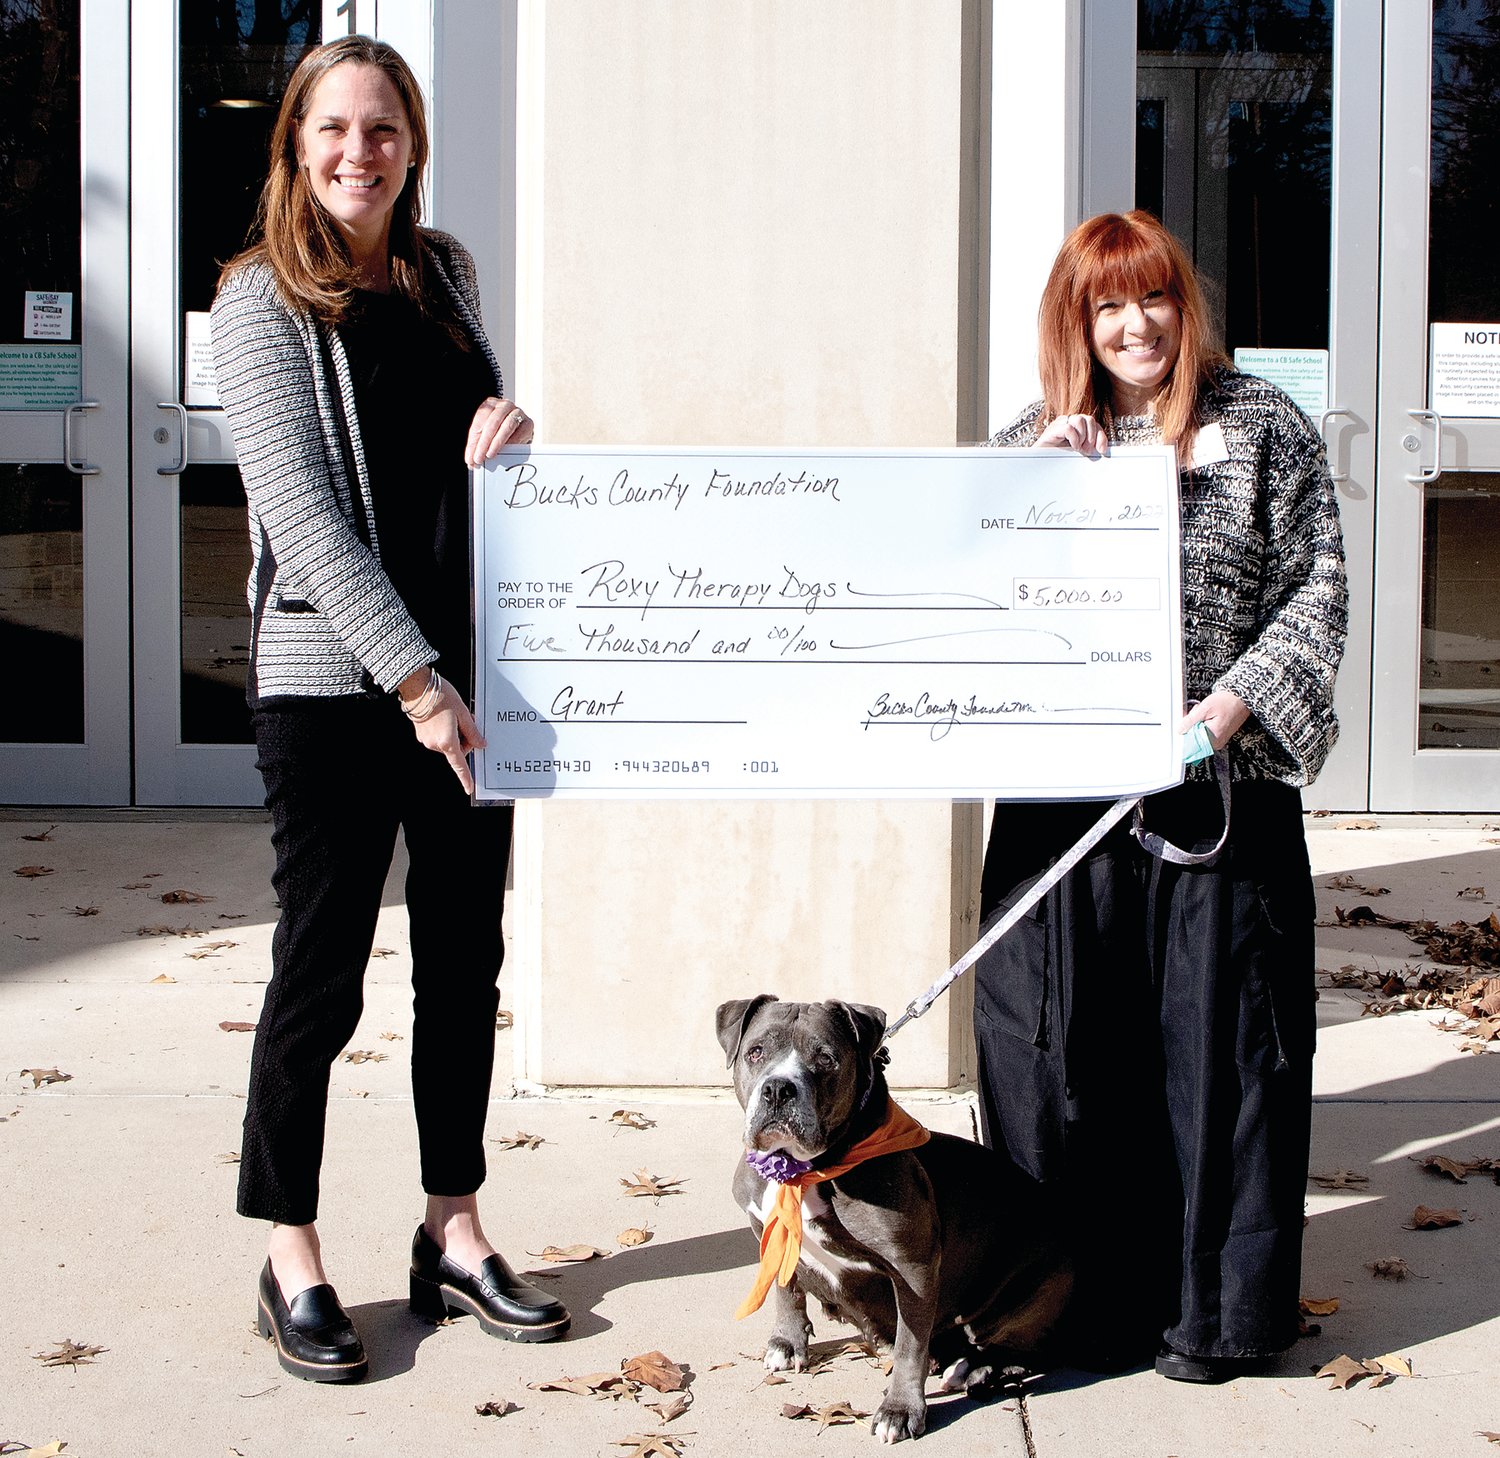 Mandy Munday, executive director of the Bucks County Foundation, presents a check for $5,000 to Roxy Therapy Dogs President Sharon Fleck, as Bleu, Flecks’ Roxy dog, looks on.